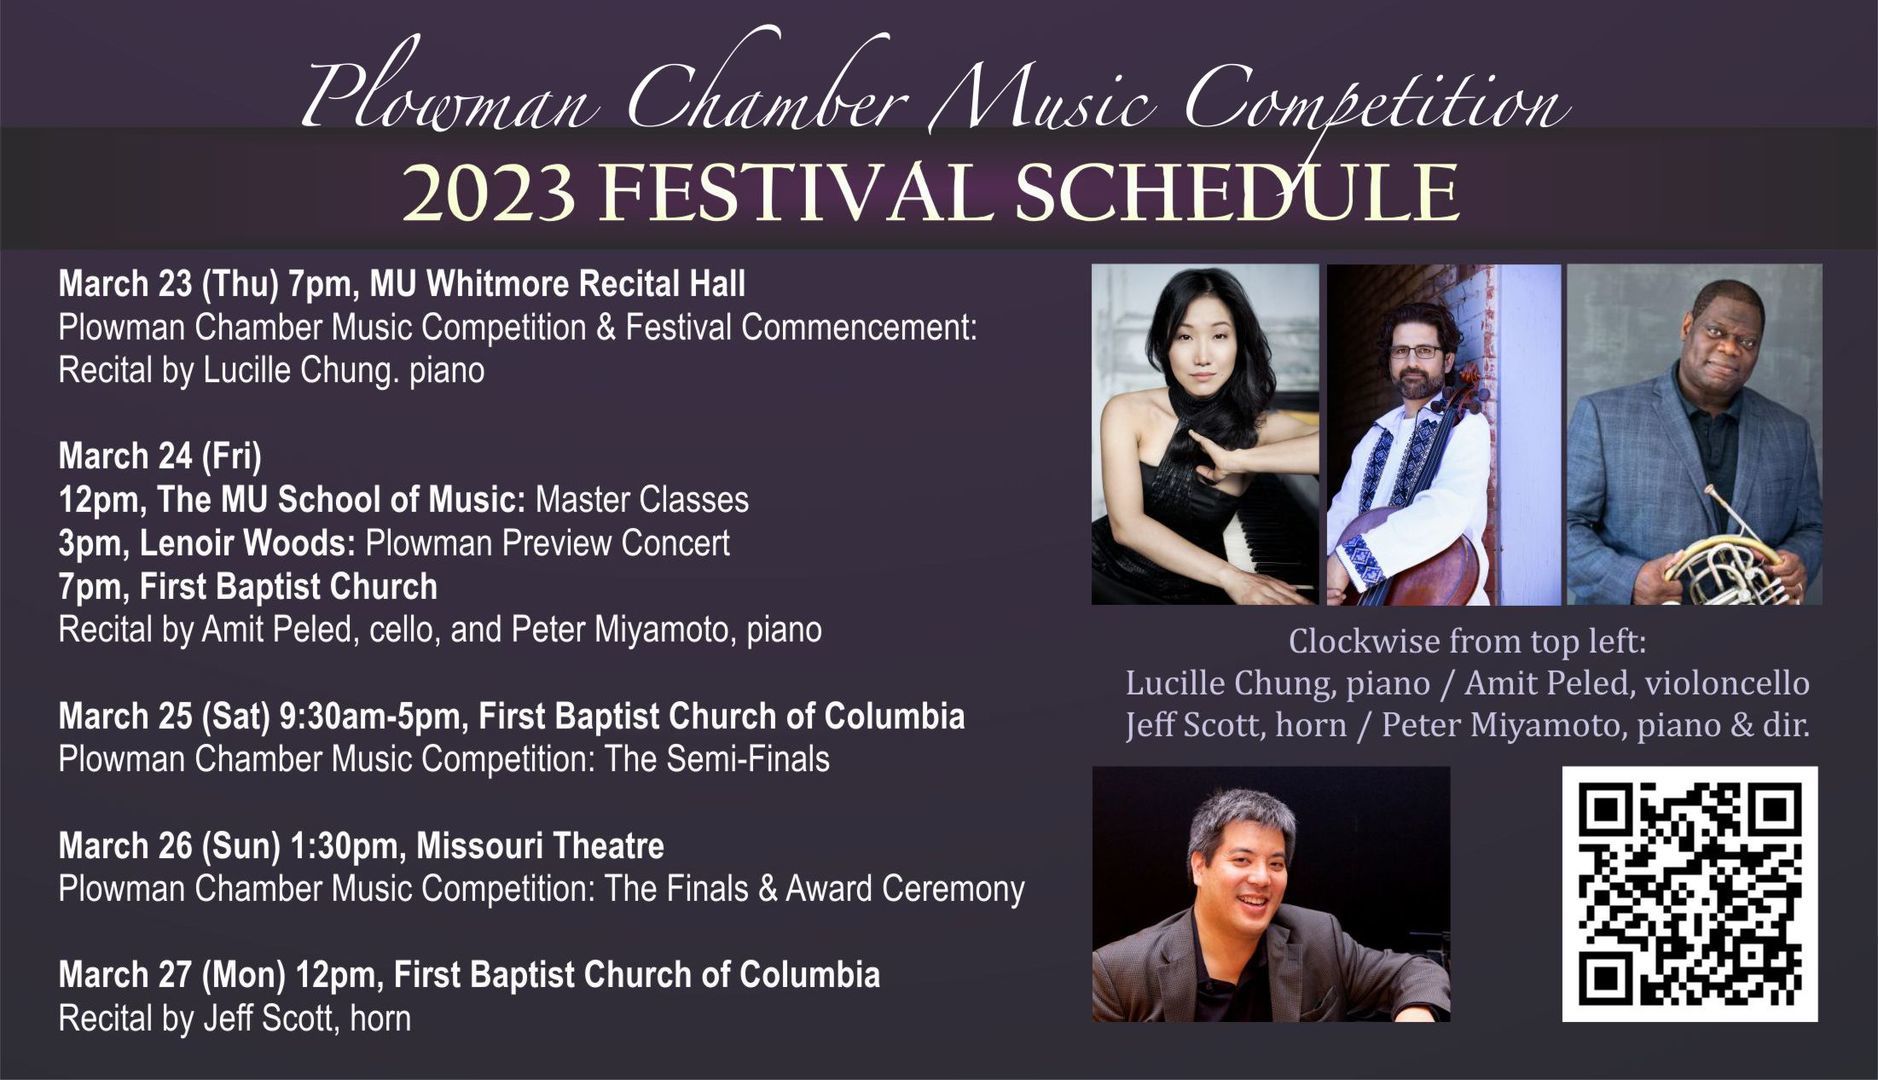 LUCILLE CHUNG PIANO RECITAL, Odyssey Chamber Music Series/Plowman Chamber Music Competition Festival, Columbia, Missouri, United States